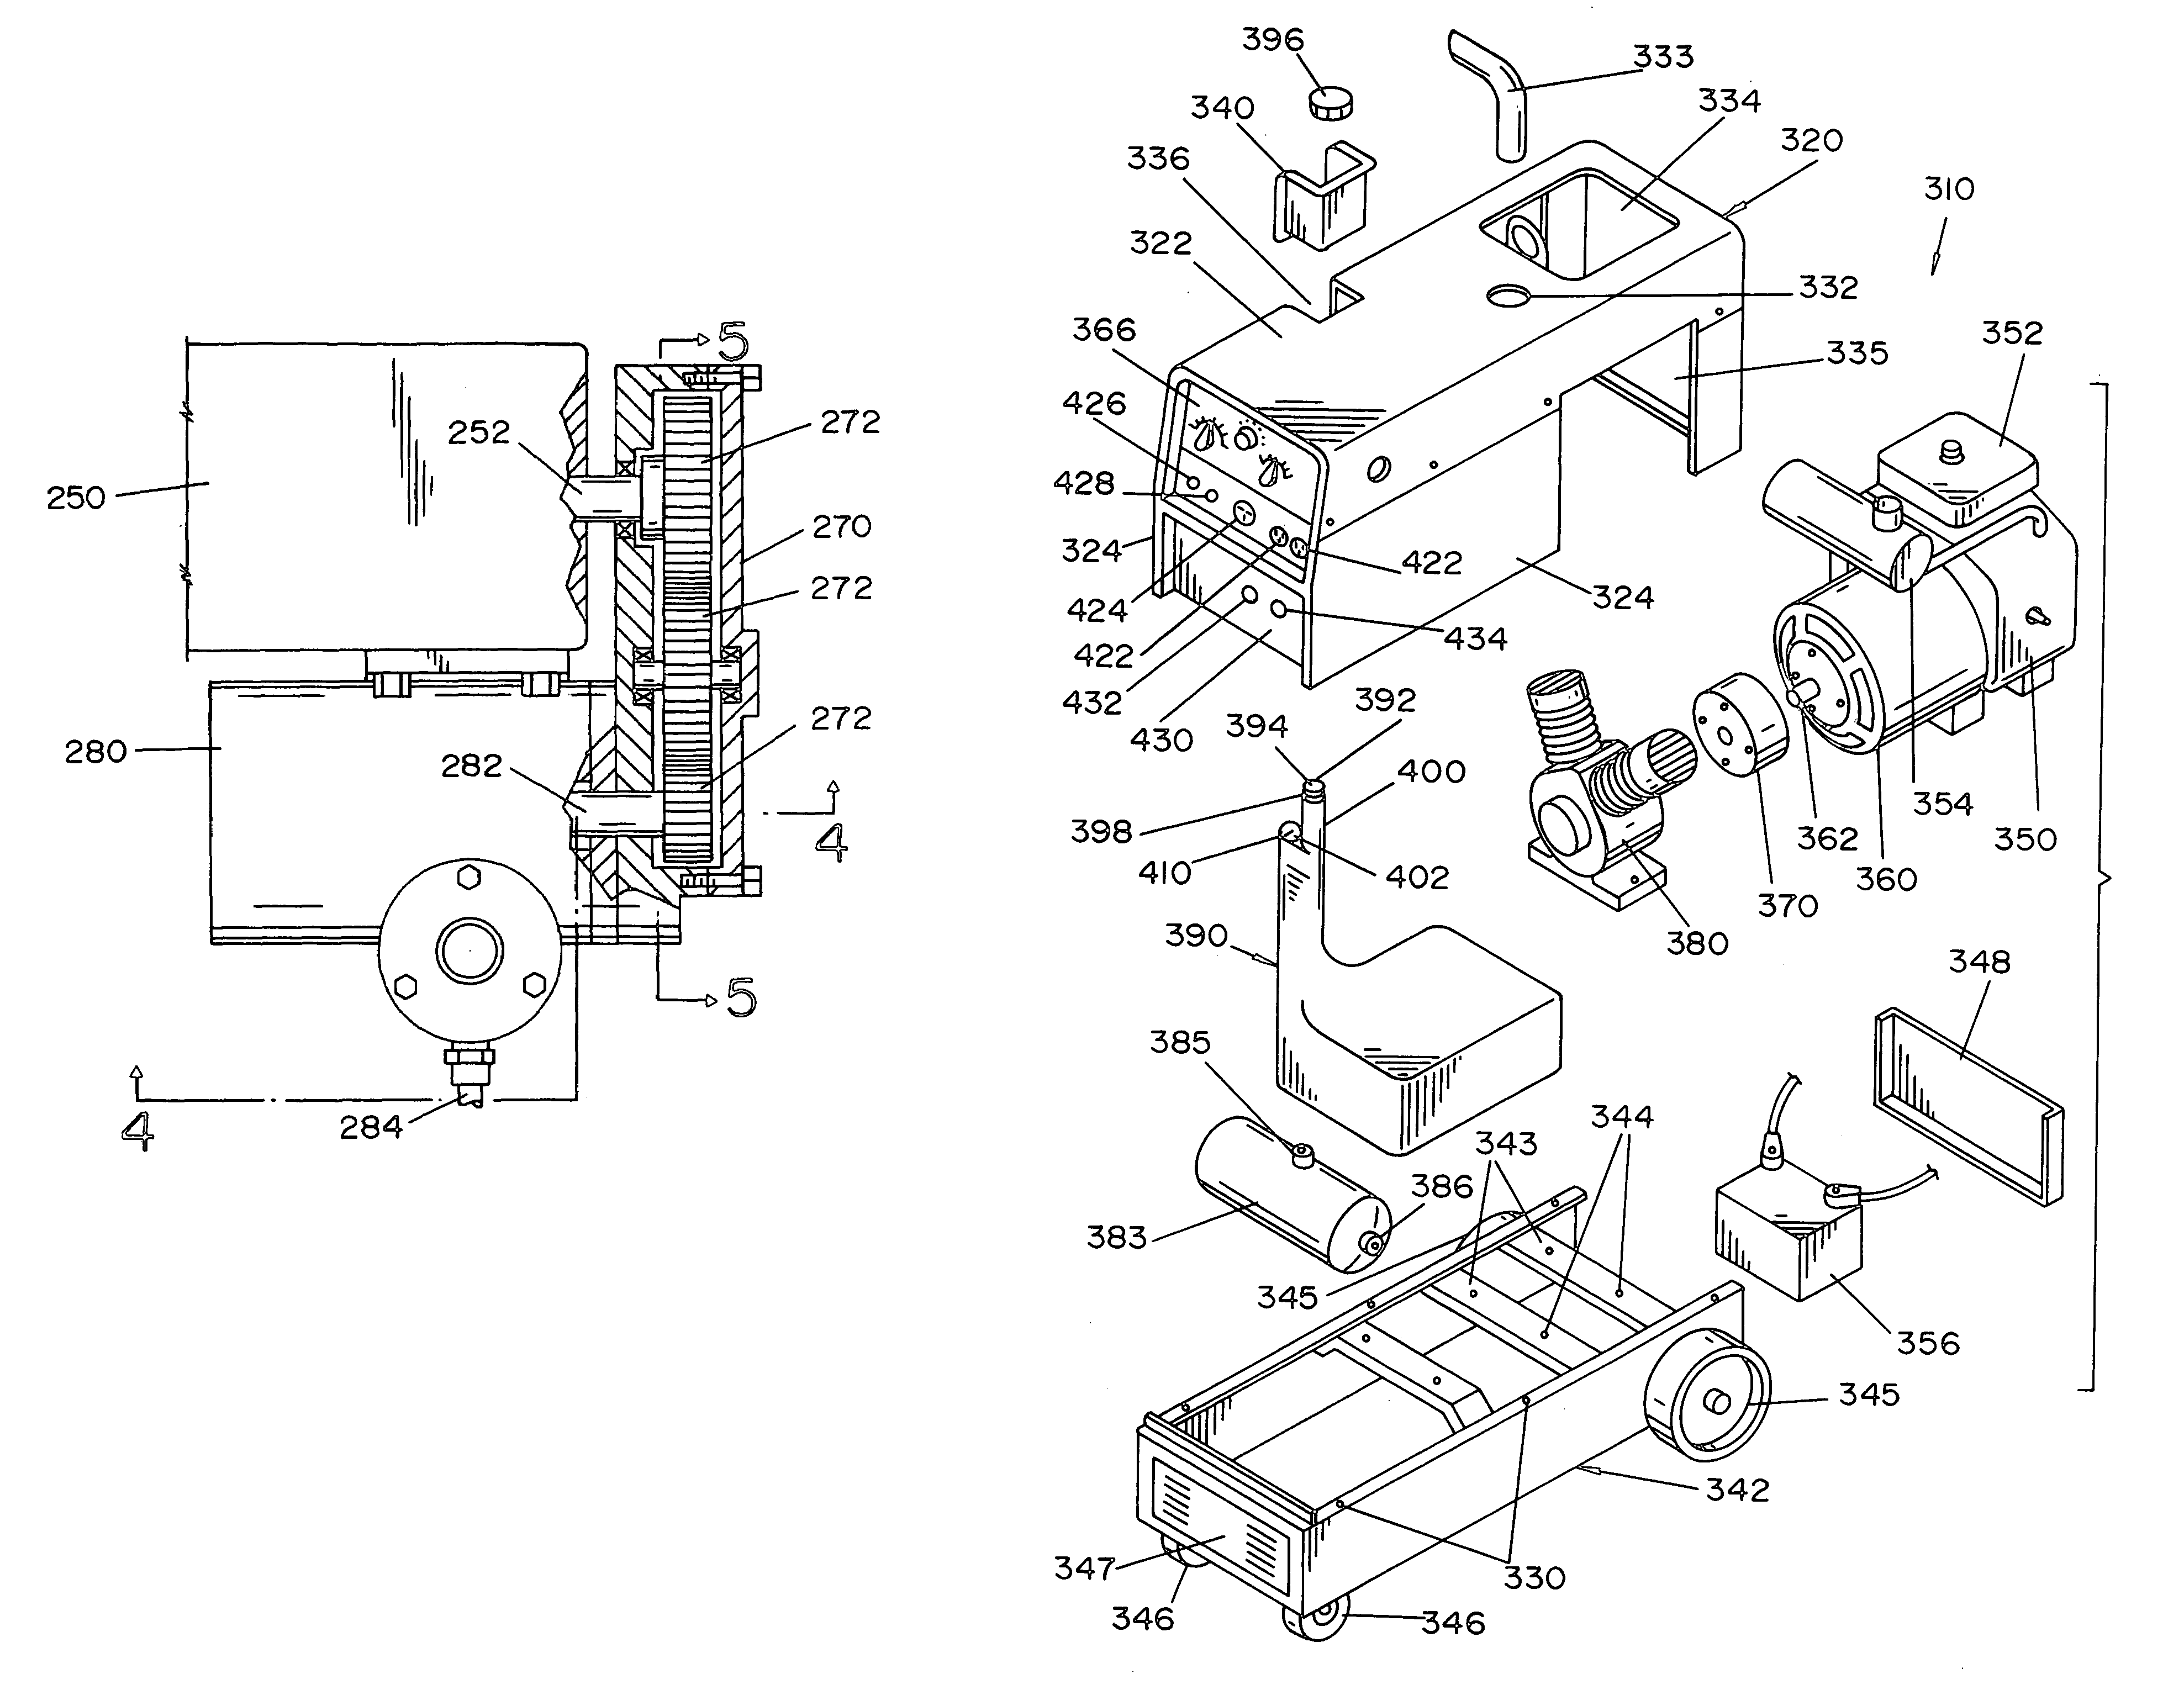 Self-contained integrated welder/generator and compressor